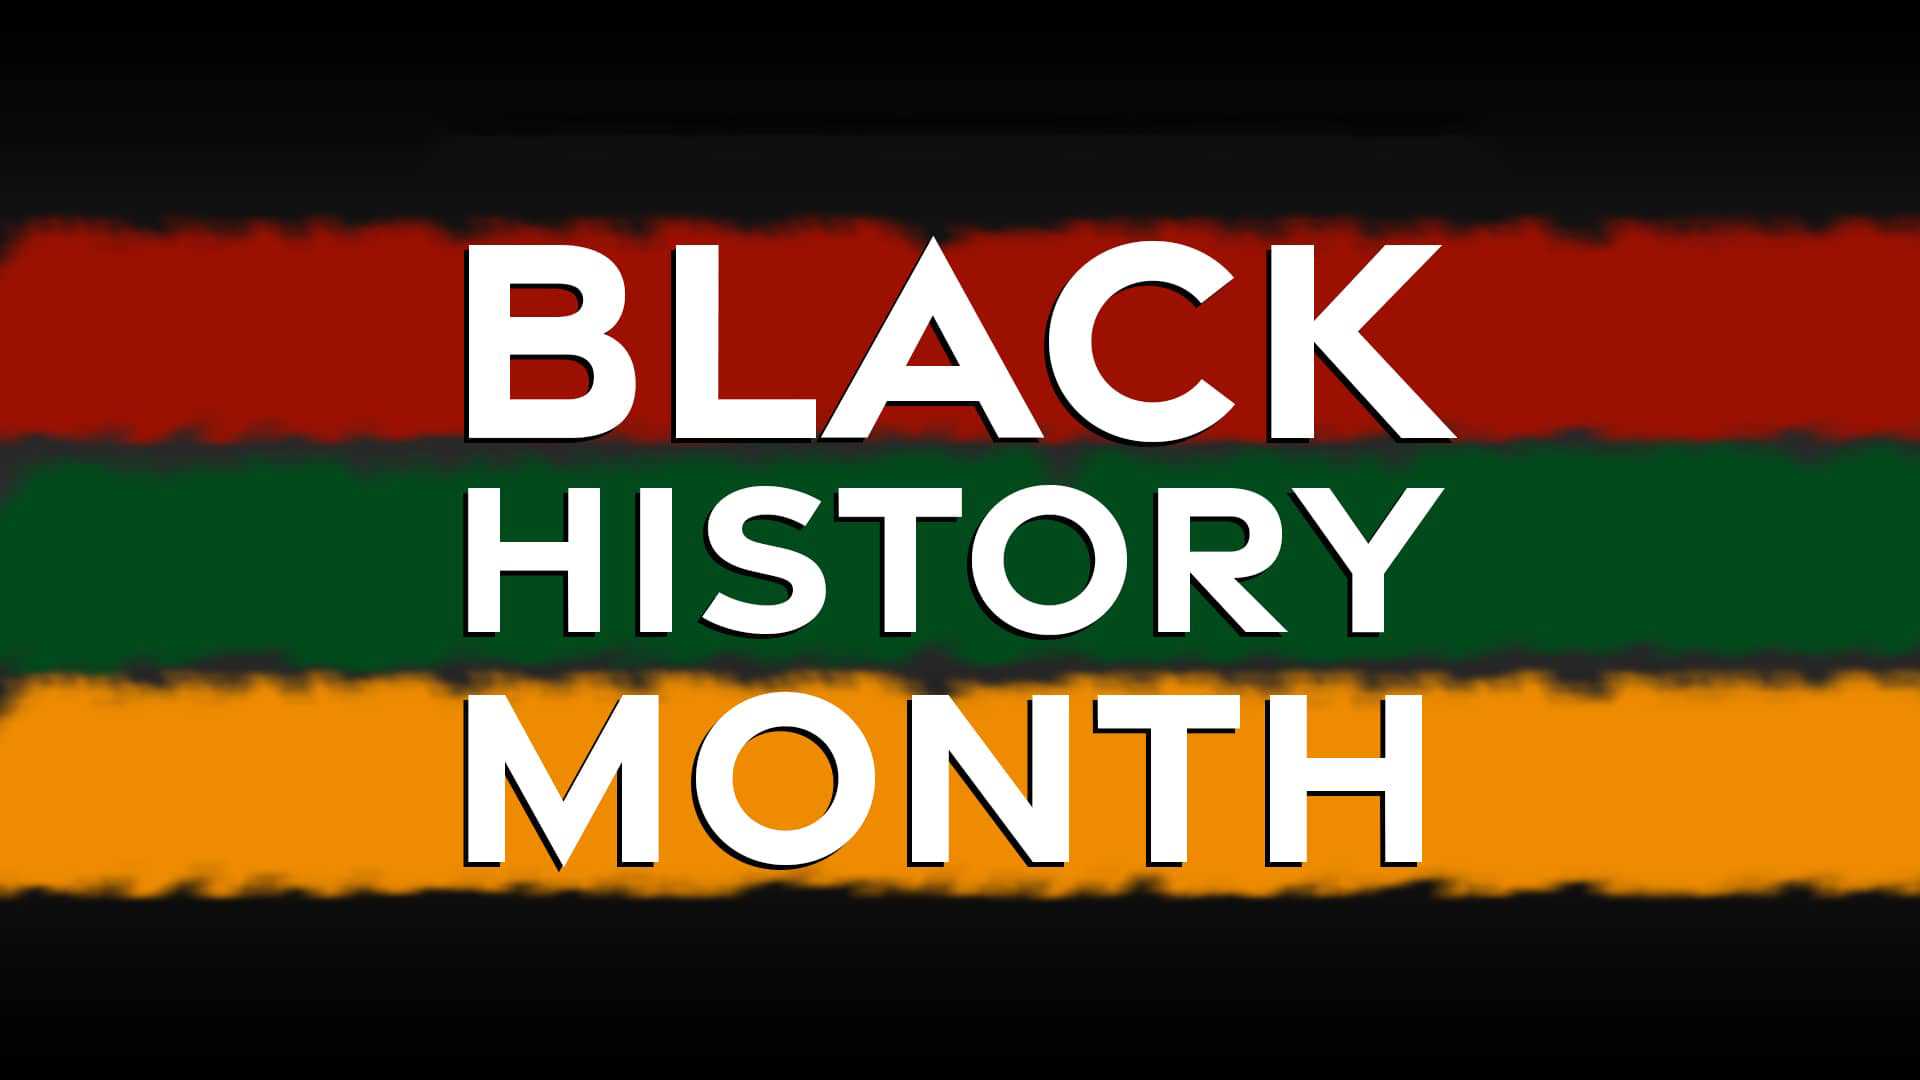 Google invests millions in honor of Black History Month launches new Pixel  wallpapers  Android Central